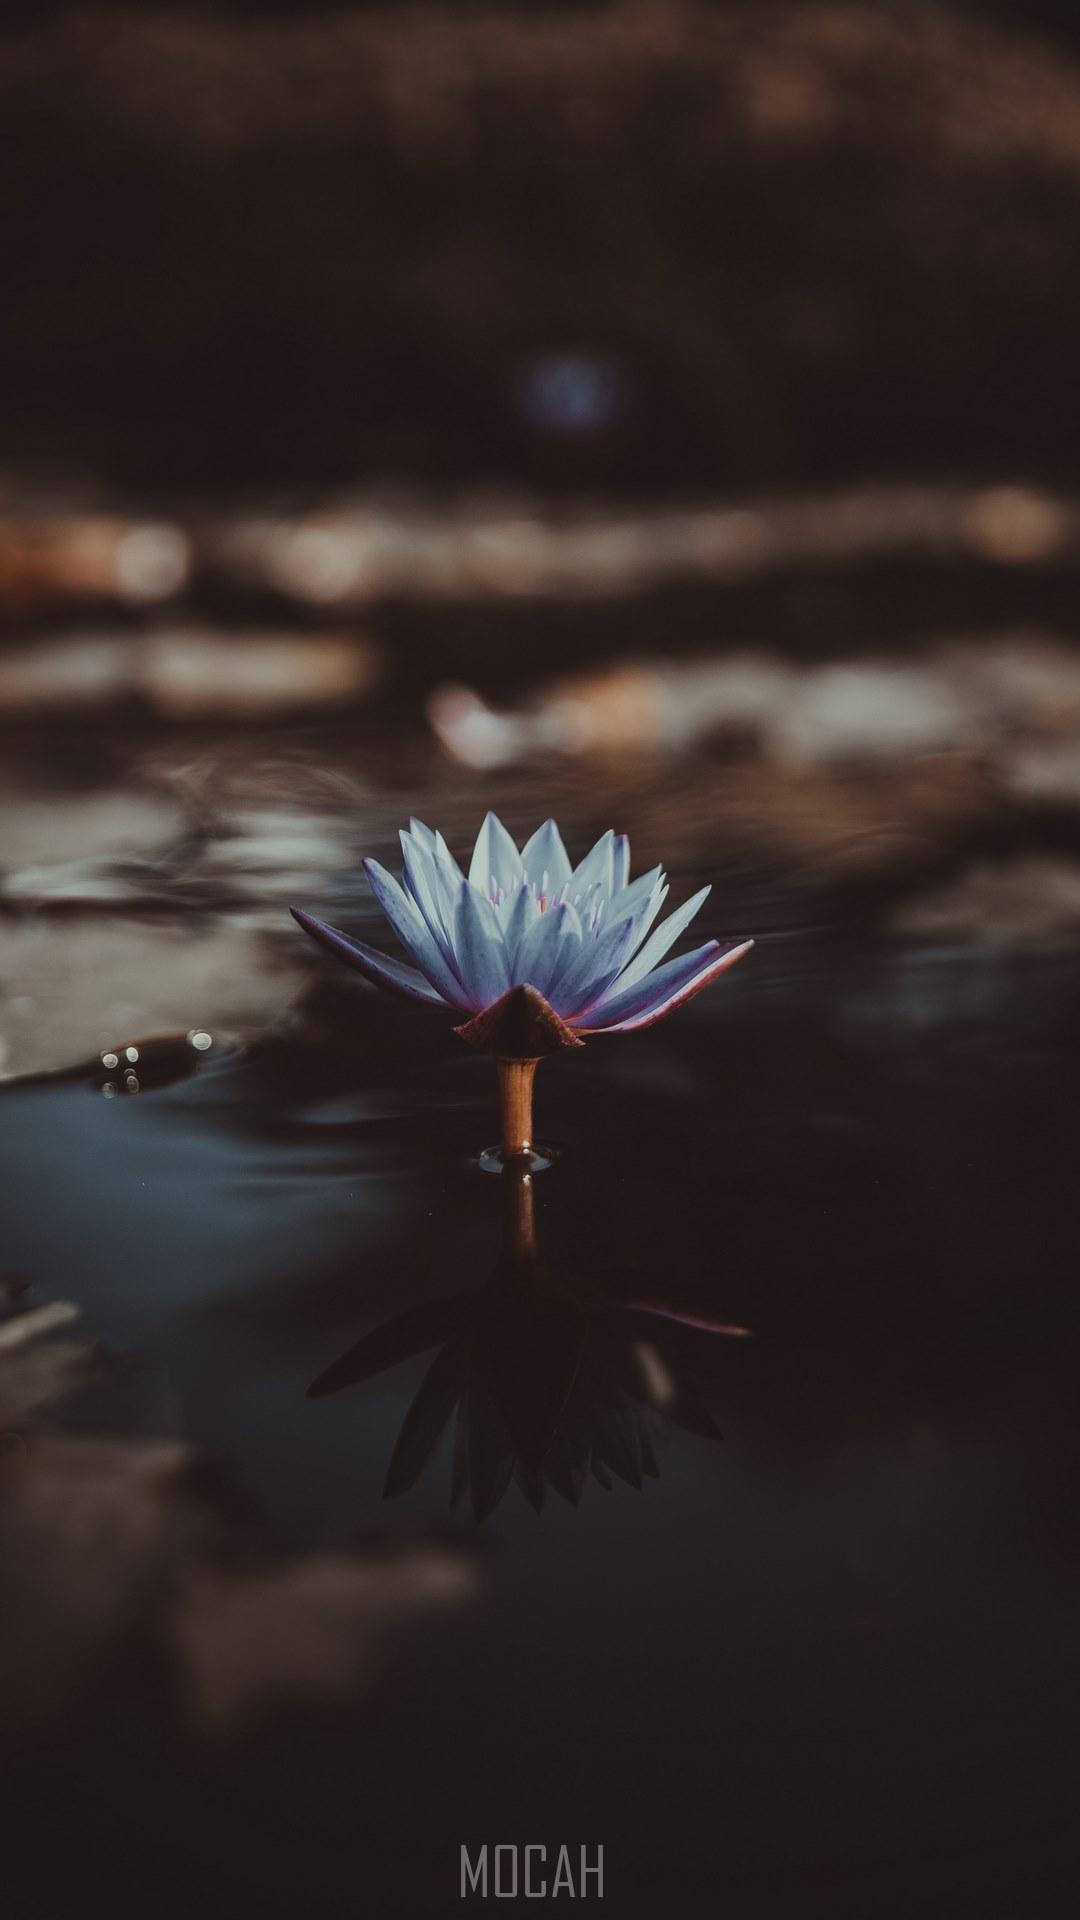 HD wallpaper, Xiaomi Mi 5X Wallpaper Full Hd, Scared To Be Lonely, A Light Violet Water Lily Jutting Out From The Surface Of Water, 1080X1920